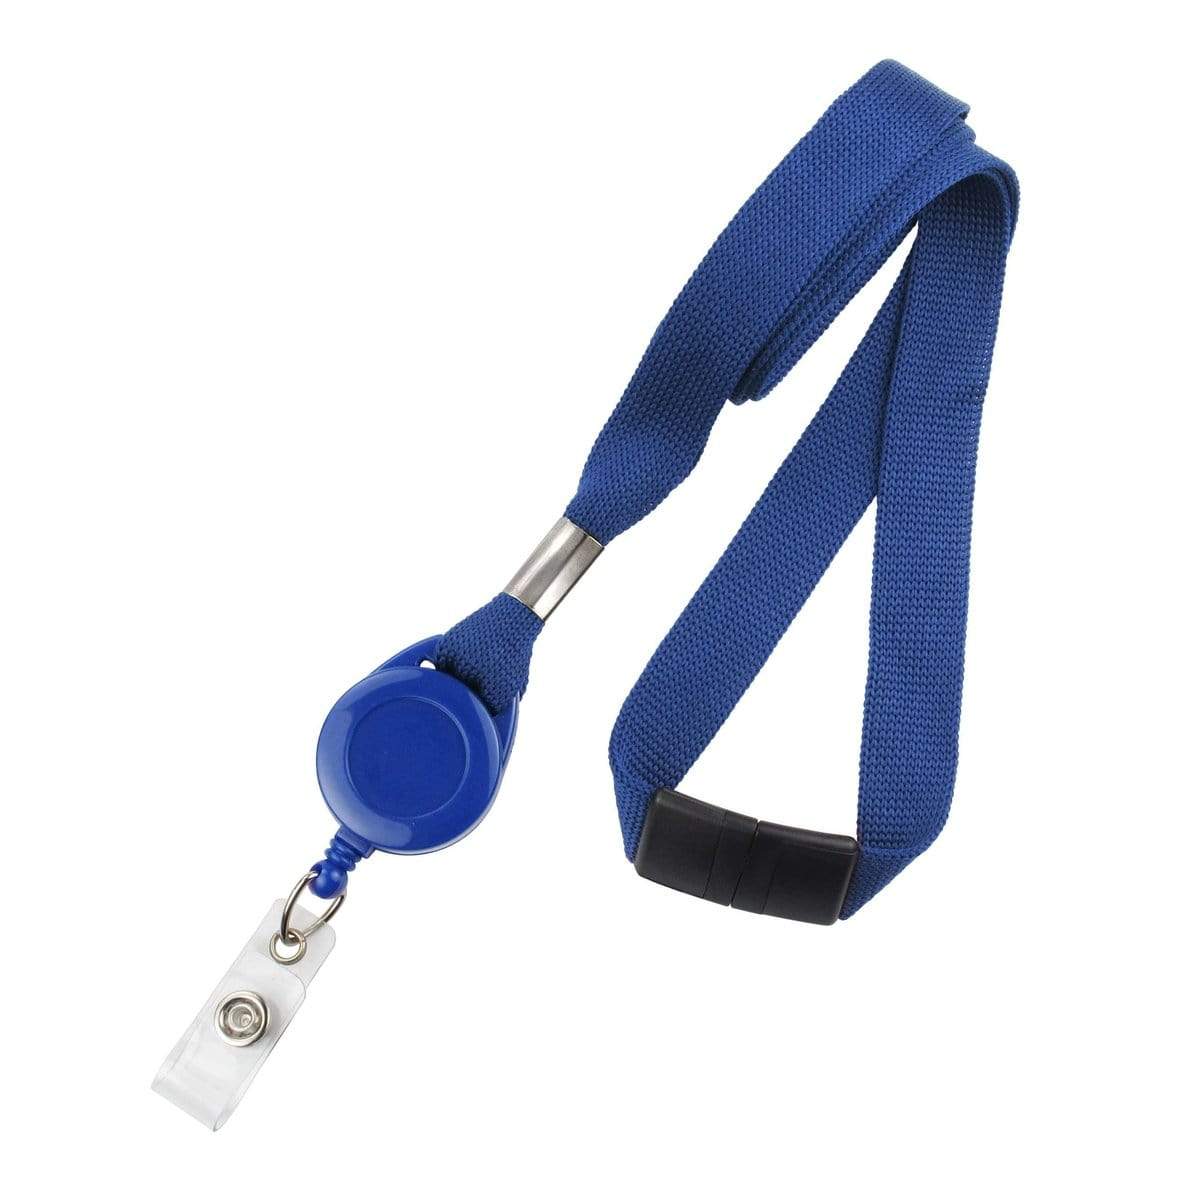 Specialist ID Royal Blue Retractable Badge Reel and Breakaway Lanyard Combo, Packaged and Sold Individually